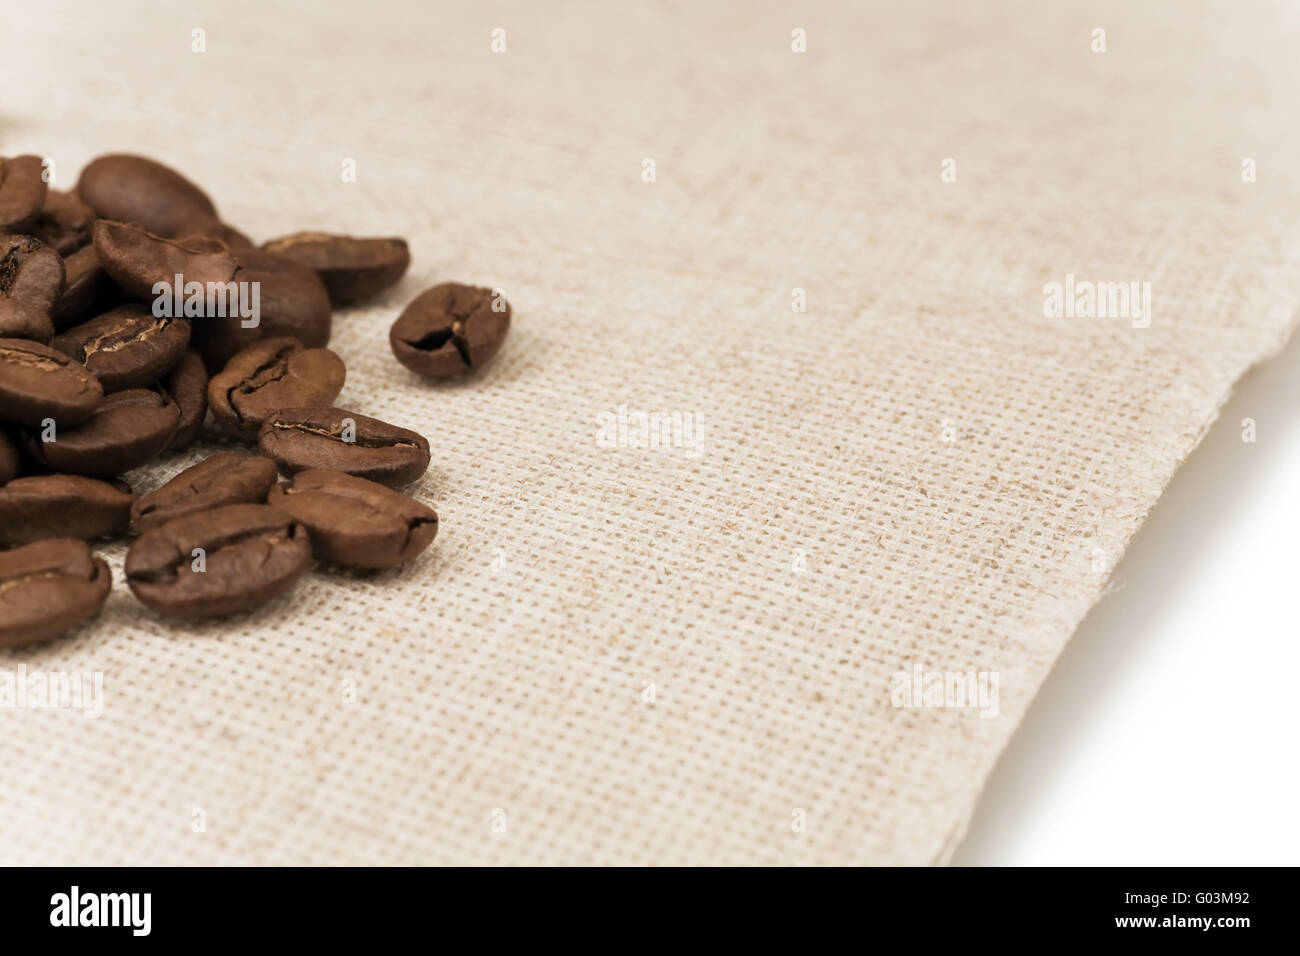 roasted coffee beans on a yellow paper napkin Stock Photo